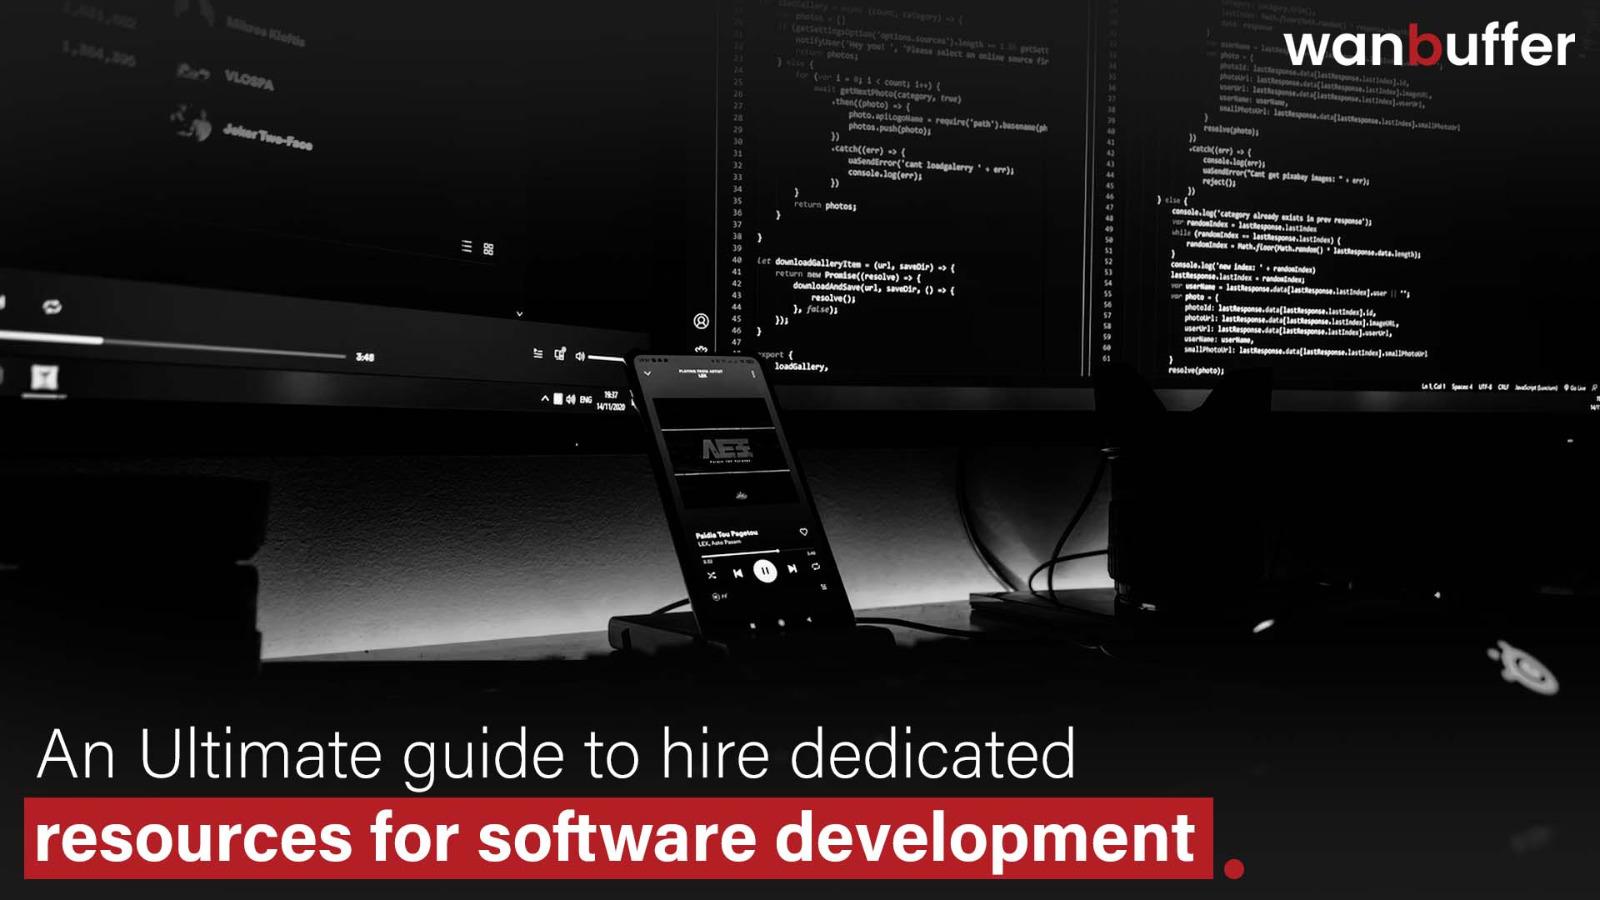 How to Hire Dedicated Resources for Software Development